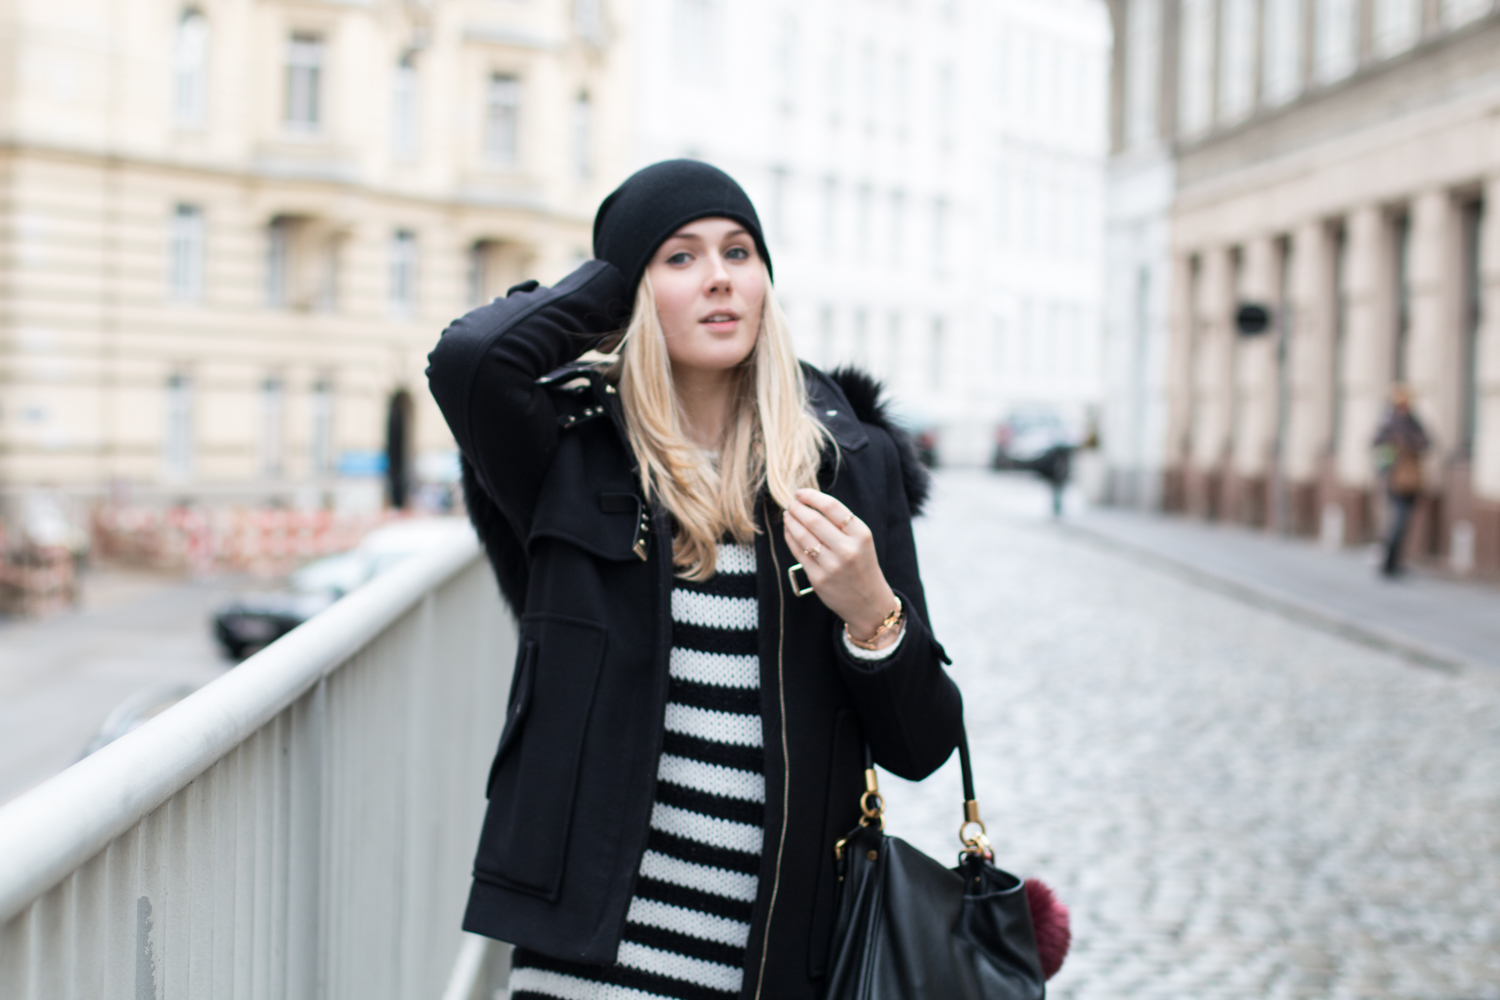 Bits and Bobs by Eva, Blog, Austrian Blog, Österreichische Blog, lovedailydose, your daily treat, fashion, beauty, food, interior, fitness, new, bitsandbobsbyeva.com, travel, winter, black and striped, black, striped, black outfit, ootd